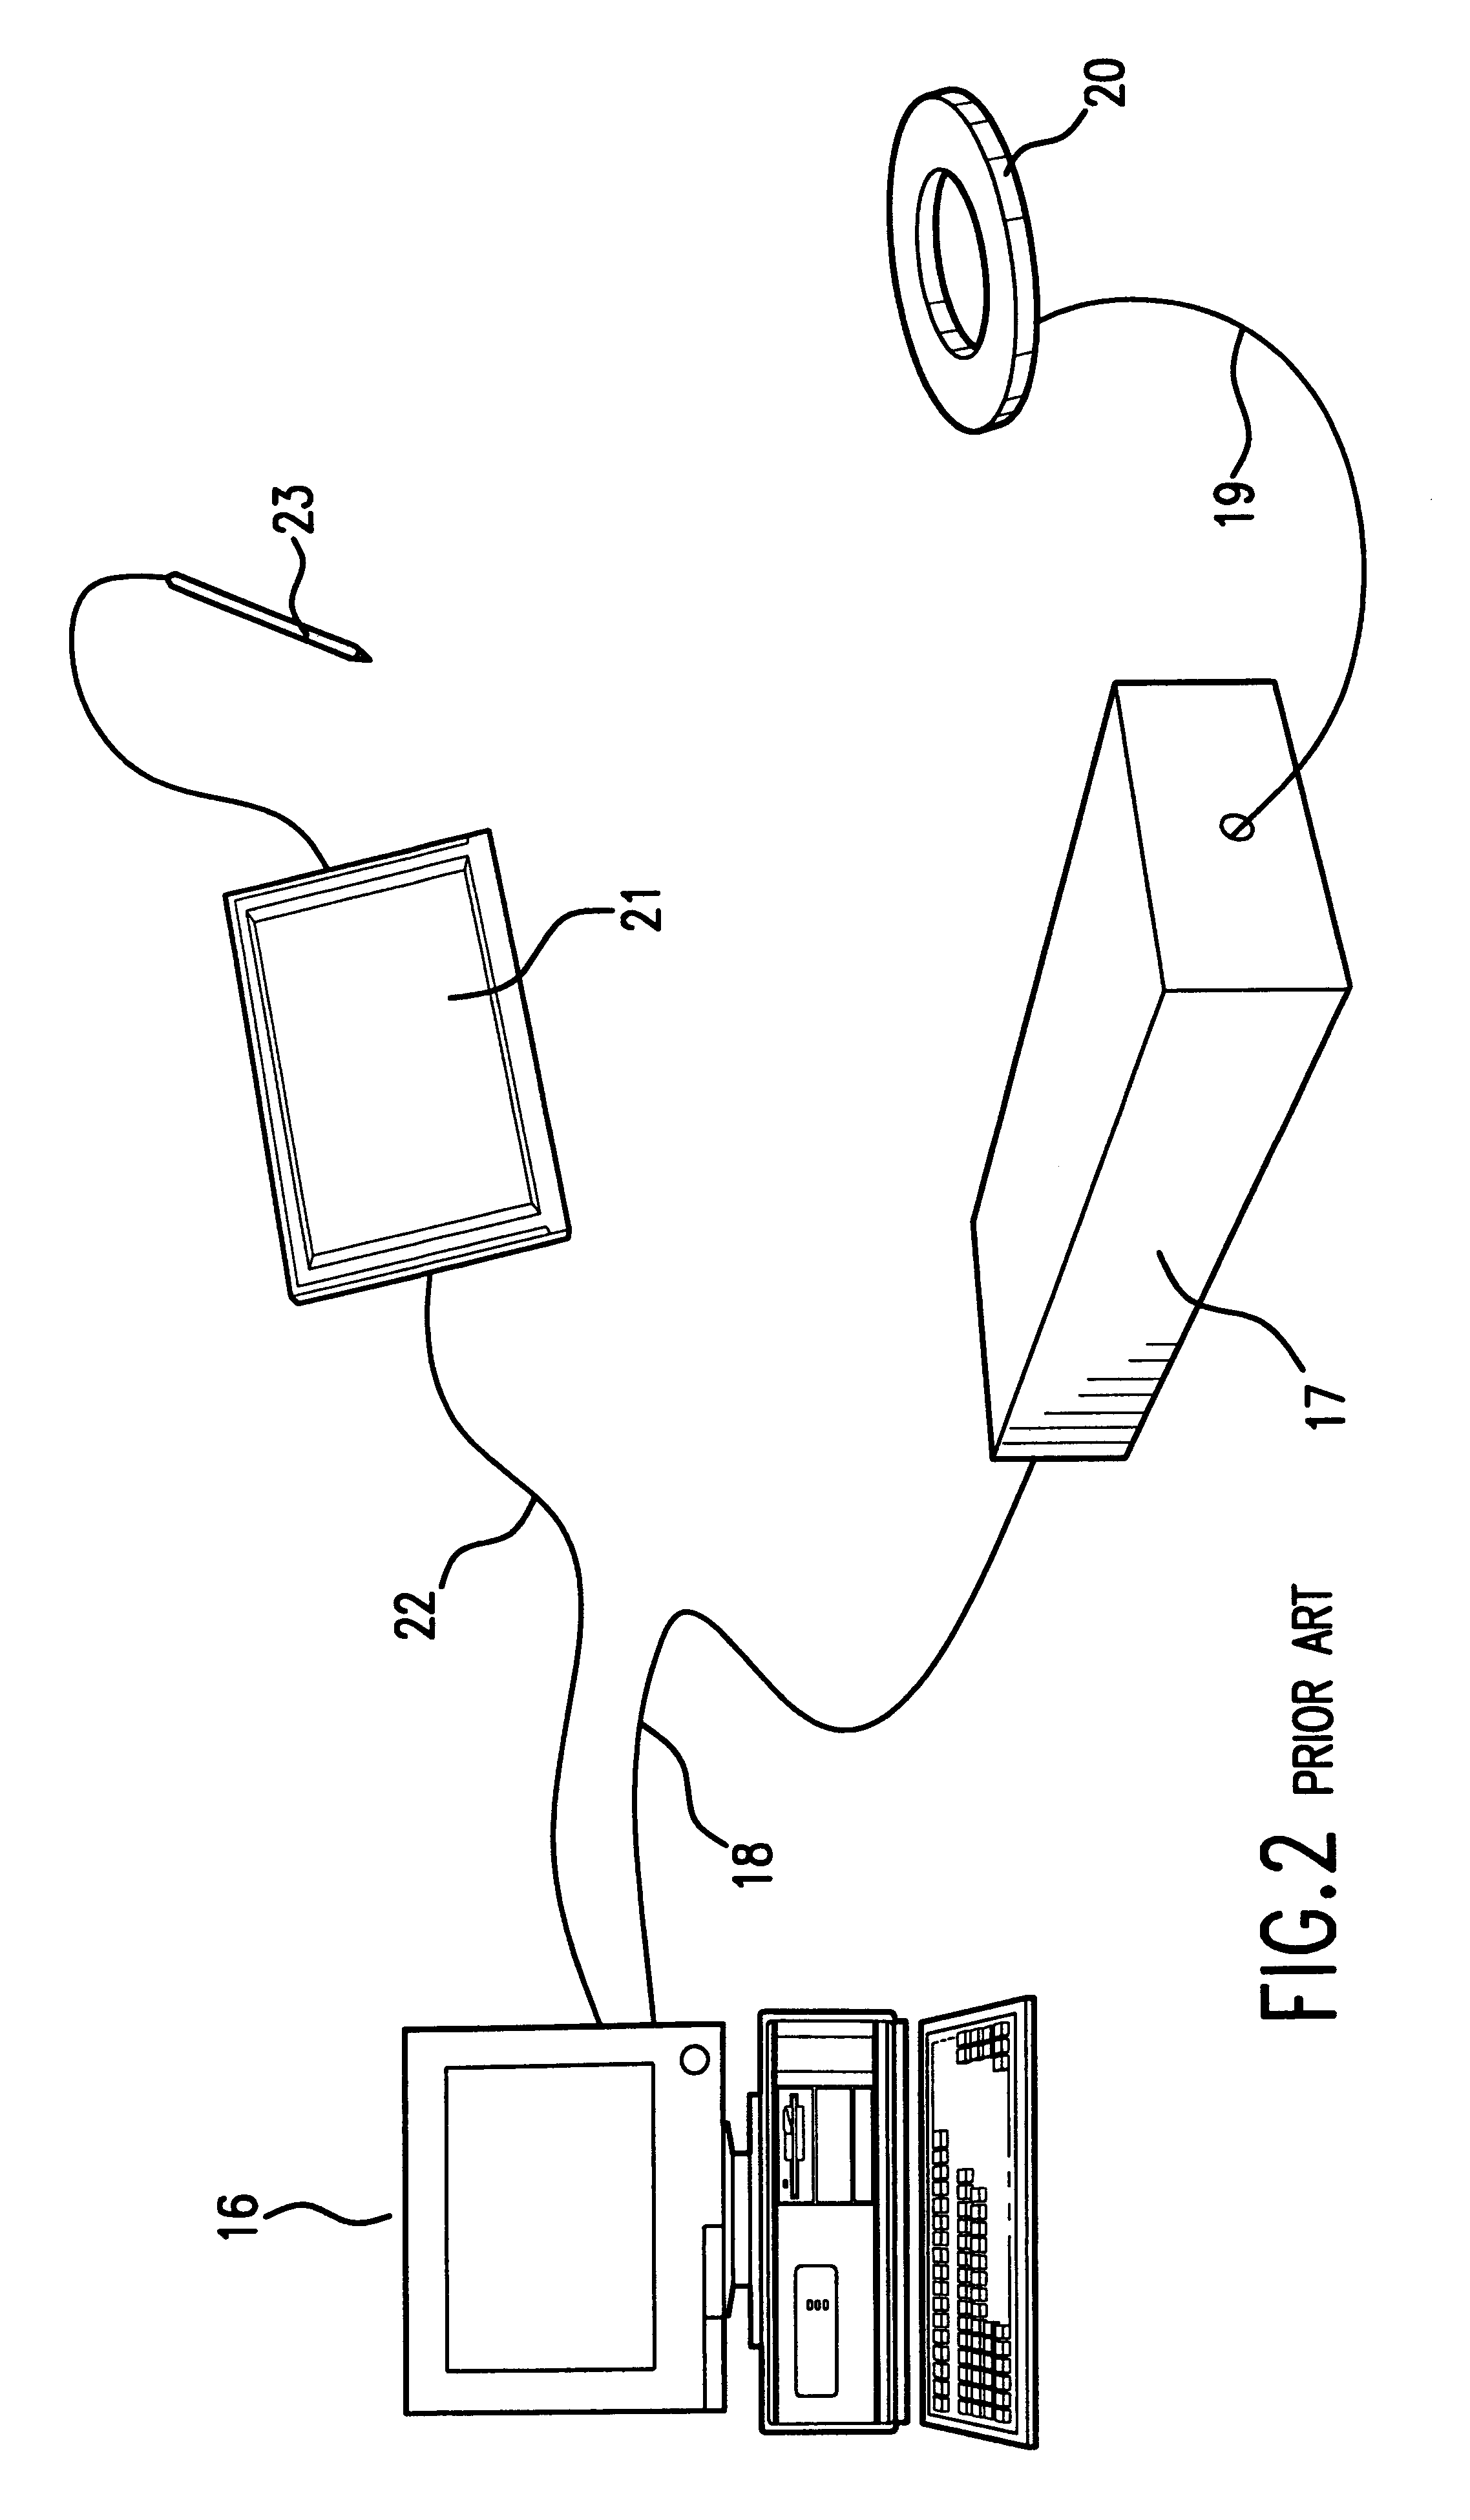 Patient interactive neurostimulation system and method